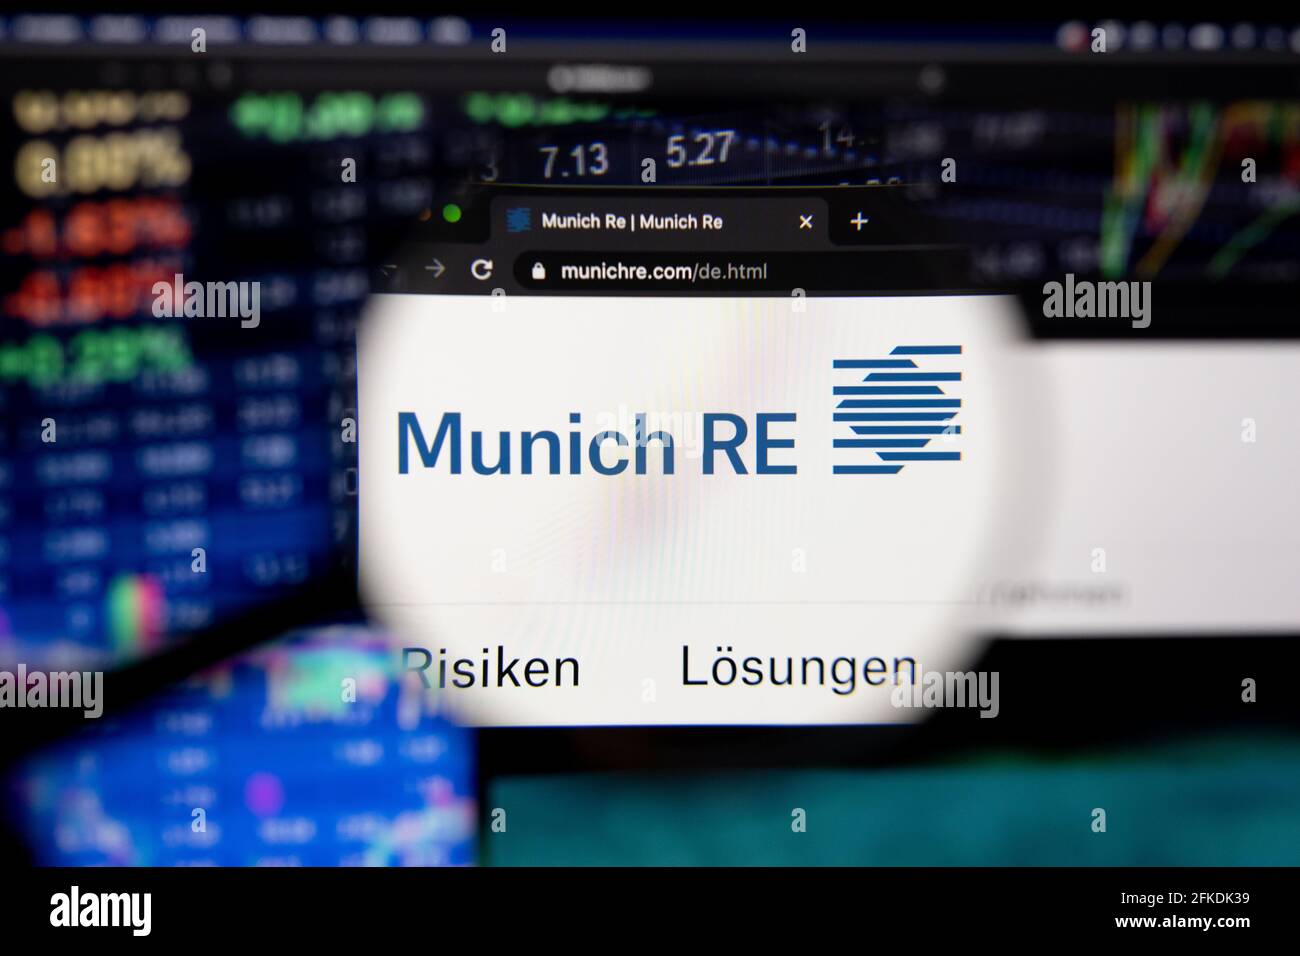 Munich RE, Münchner Rück company logo on a website with blurry stock market developments in the background, seen on a computer screen Stock Photo